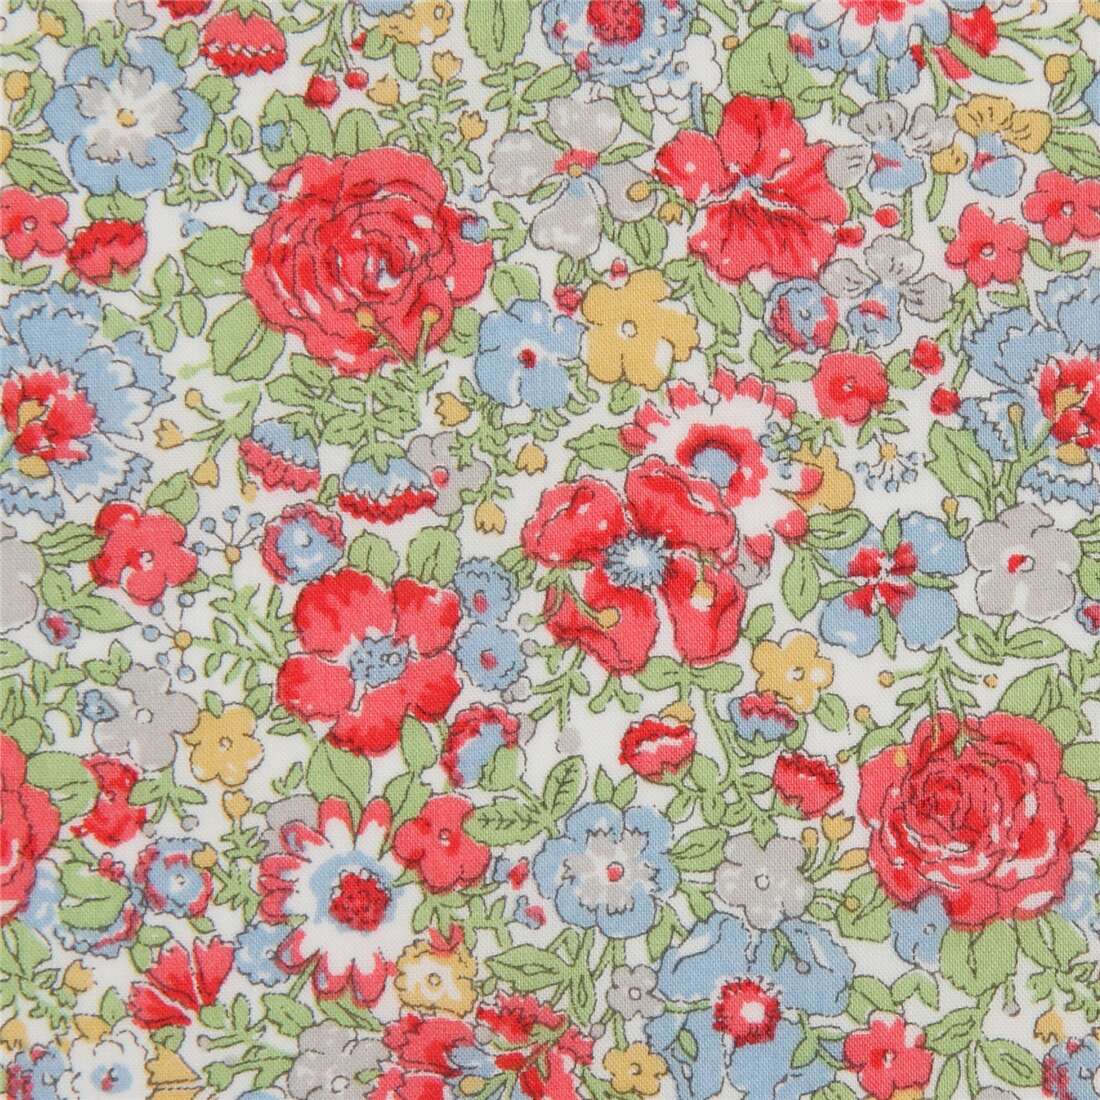 Cotton Flowers Fabric Bright Floral Fabric Rainbow Floral Cotton Fabric Fabric By The Yard Floral